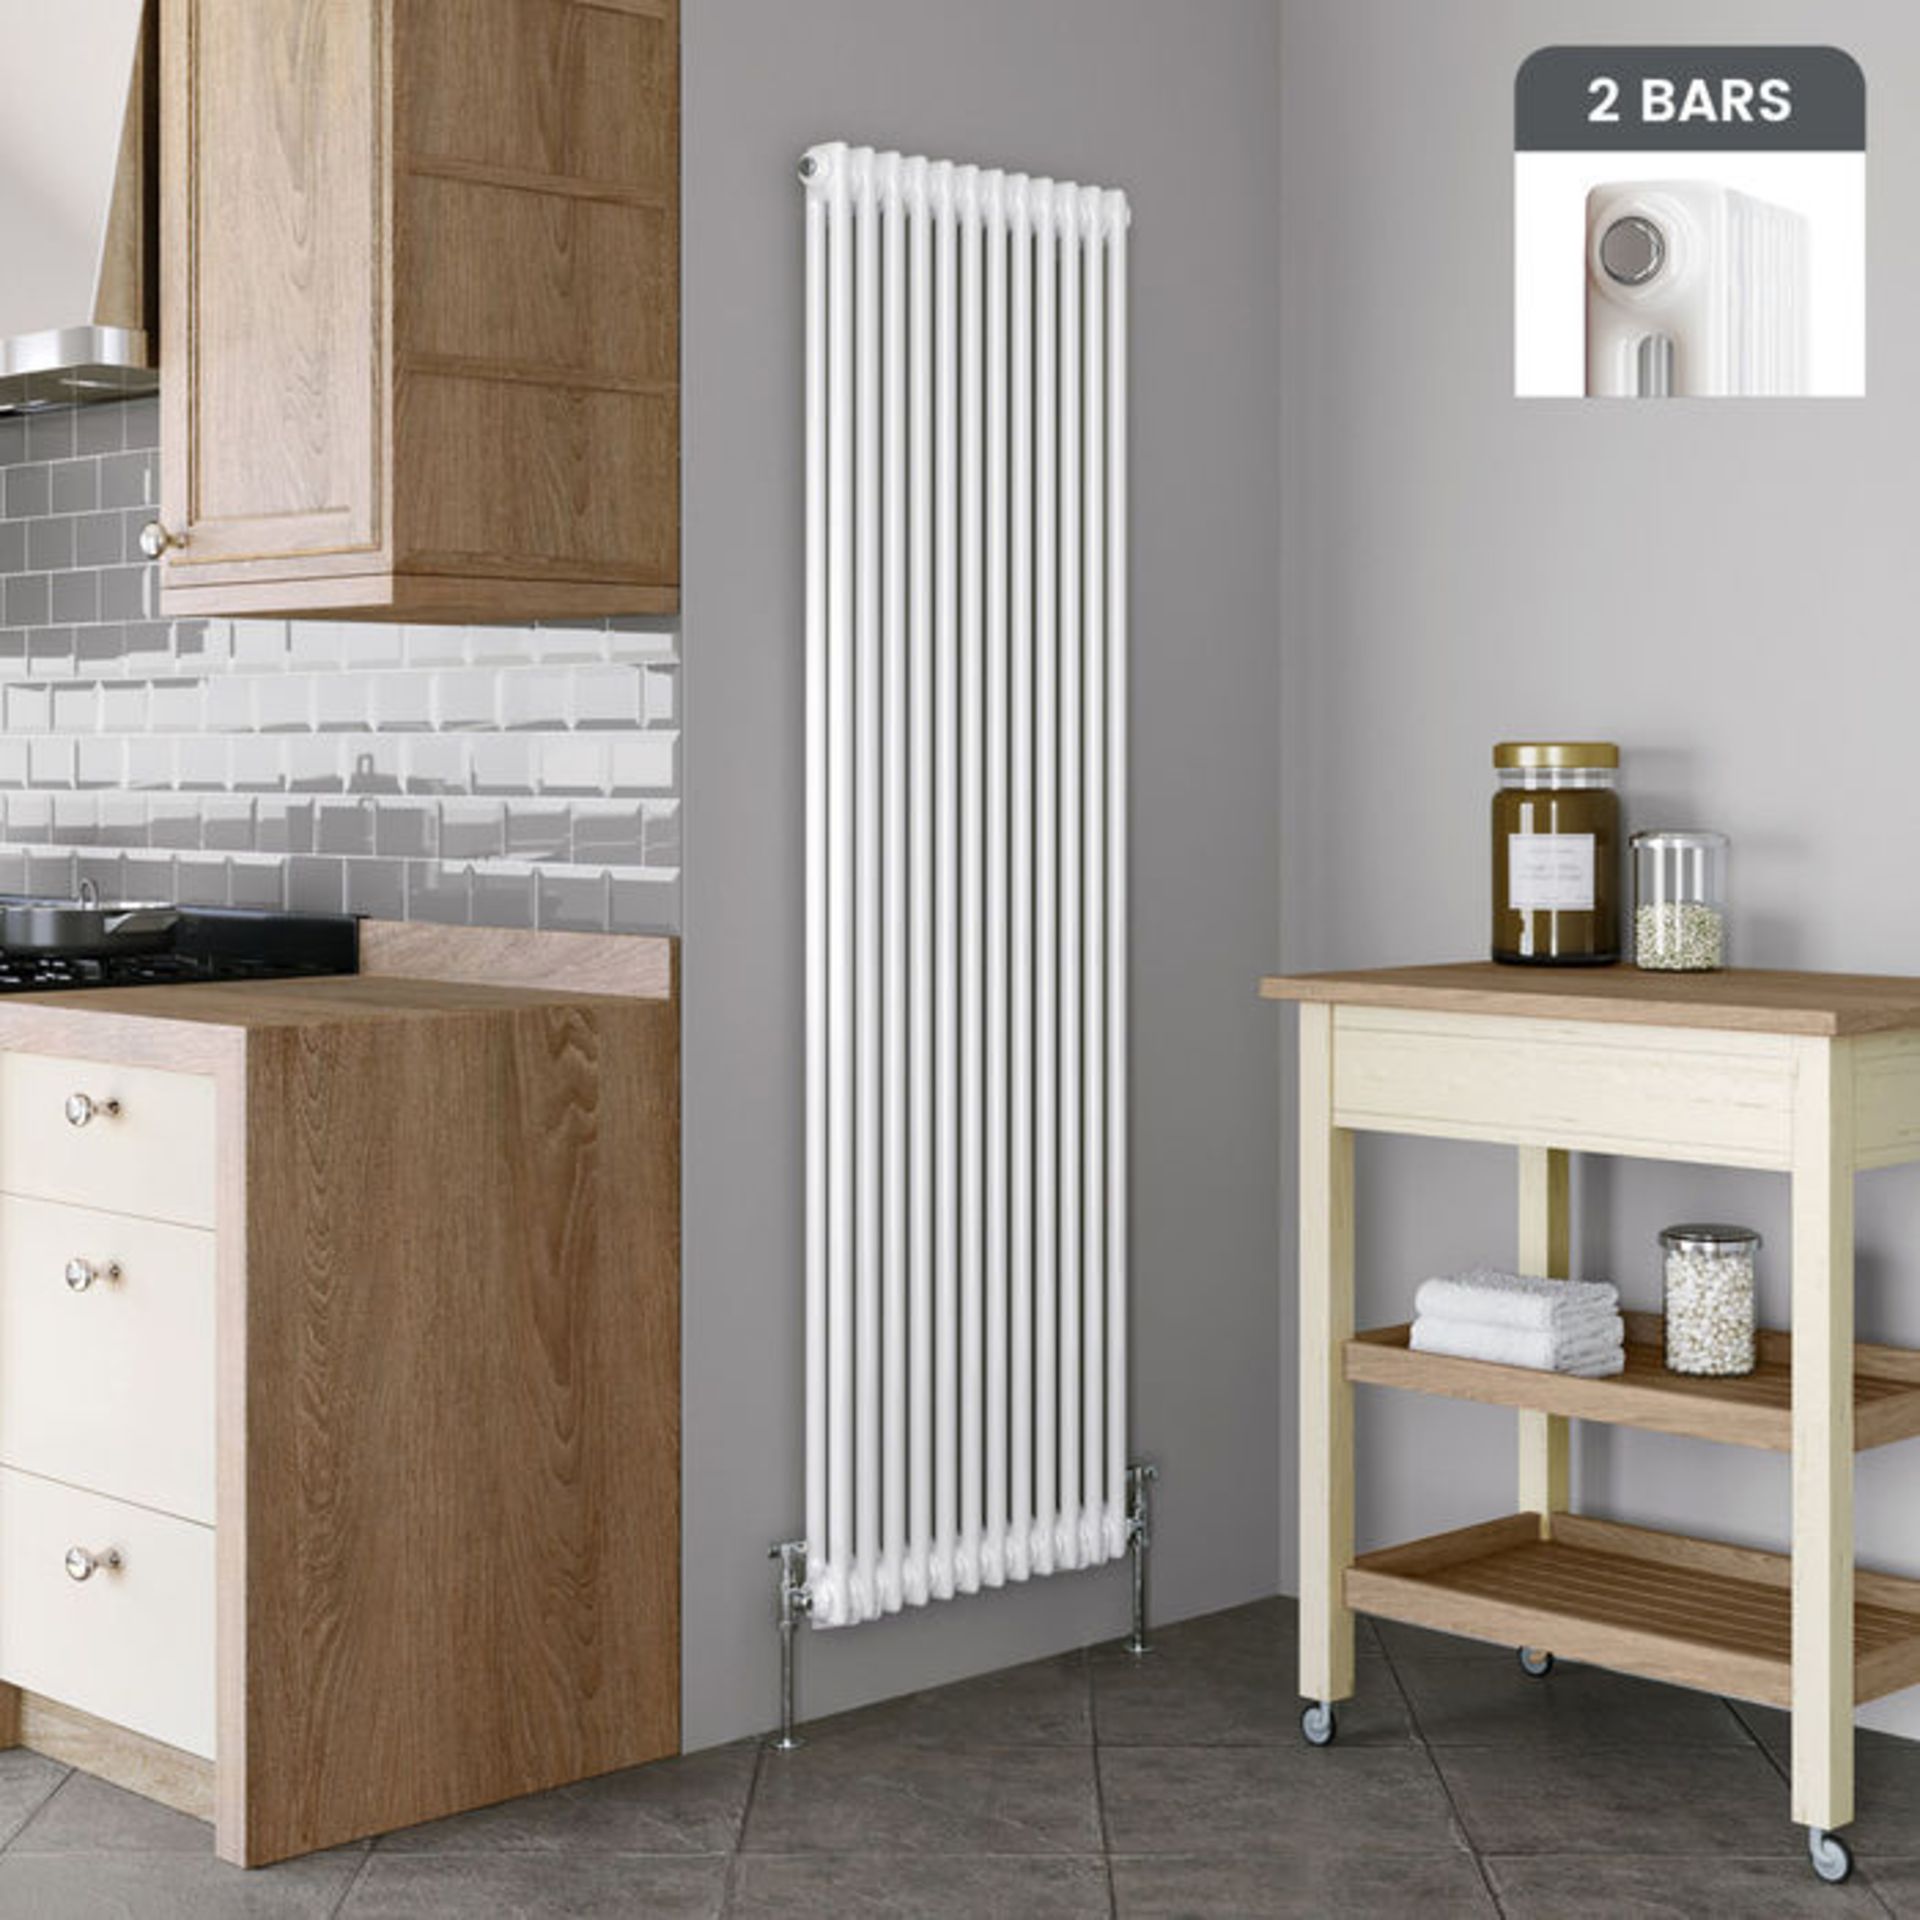 (RK107) 2000x490mm White Double Panel Vertical Colosseum Traditional Radiator. RRP £419.99. Fo...( - Image 3 of 4